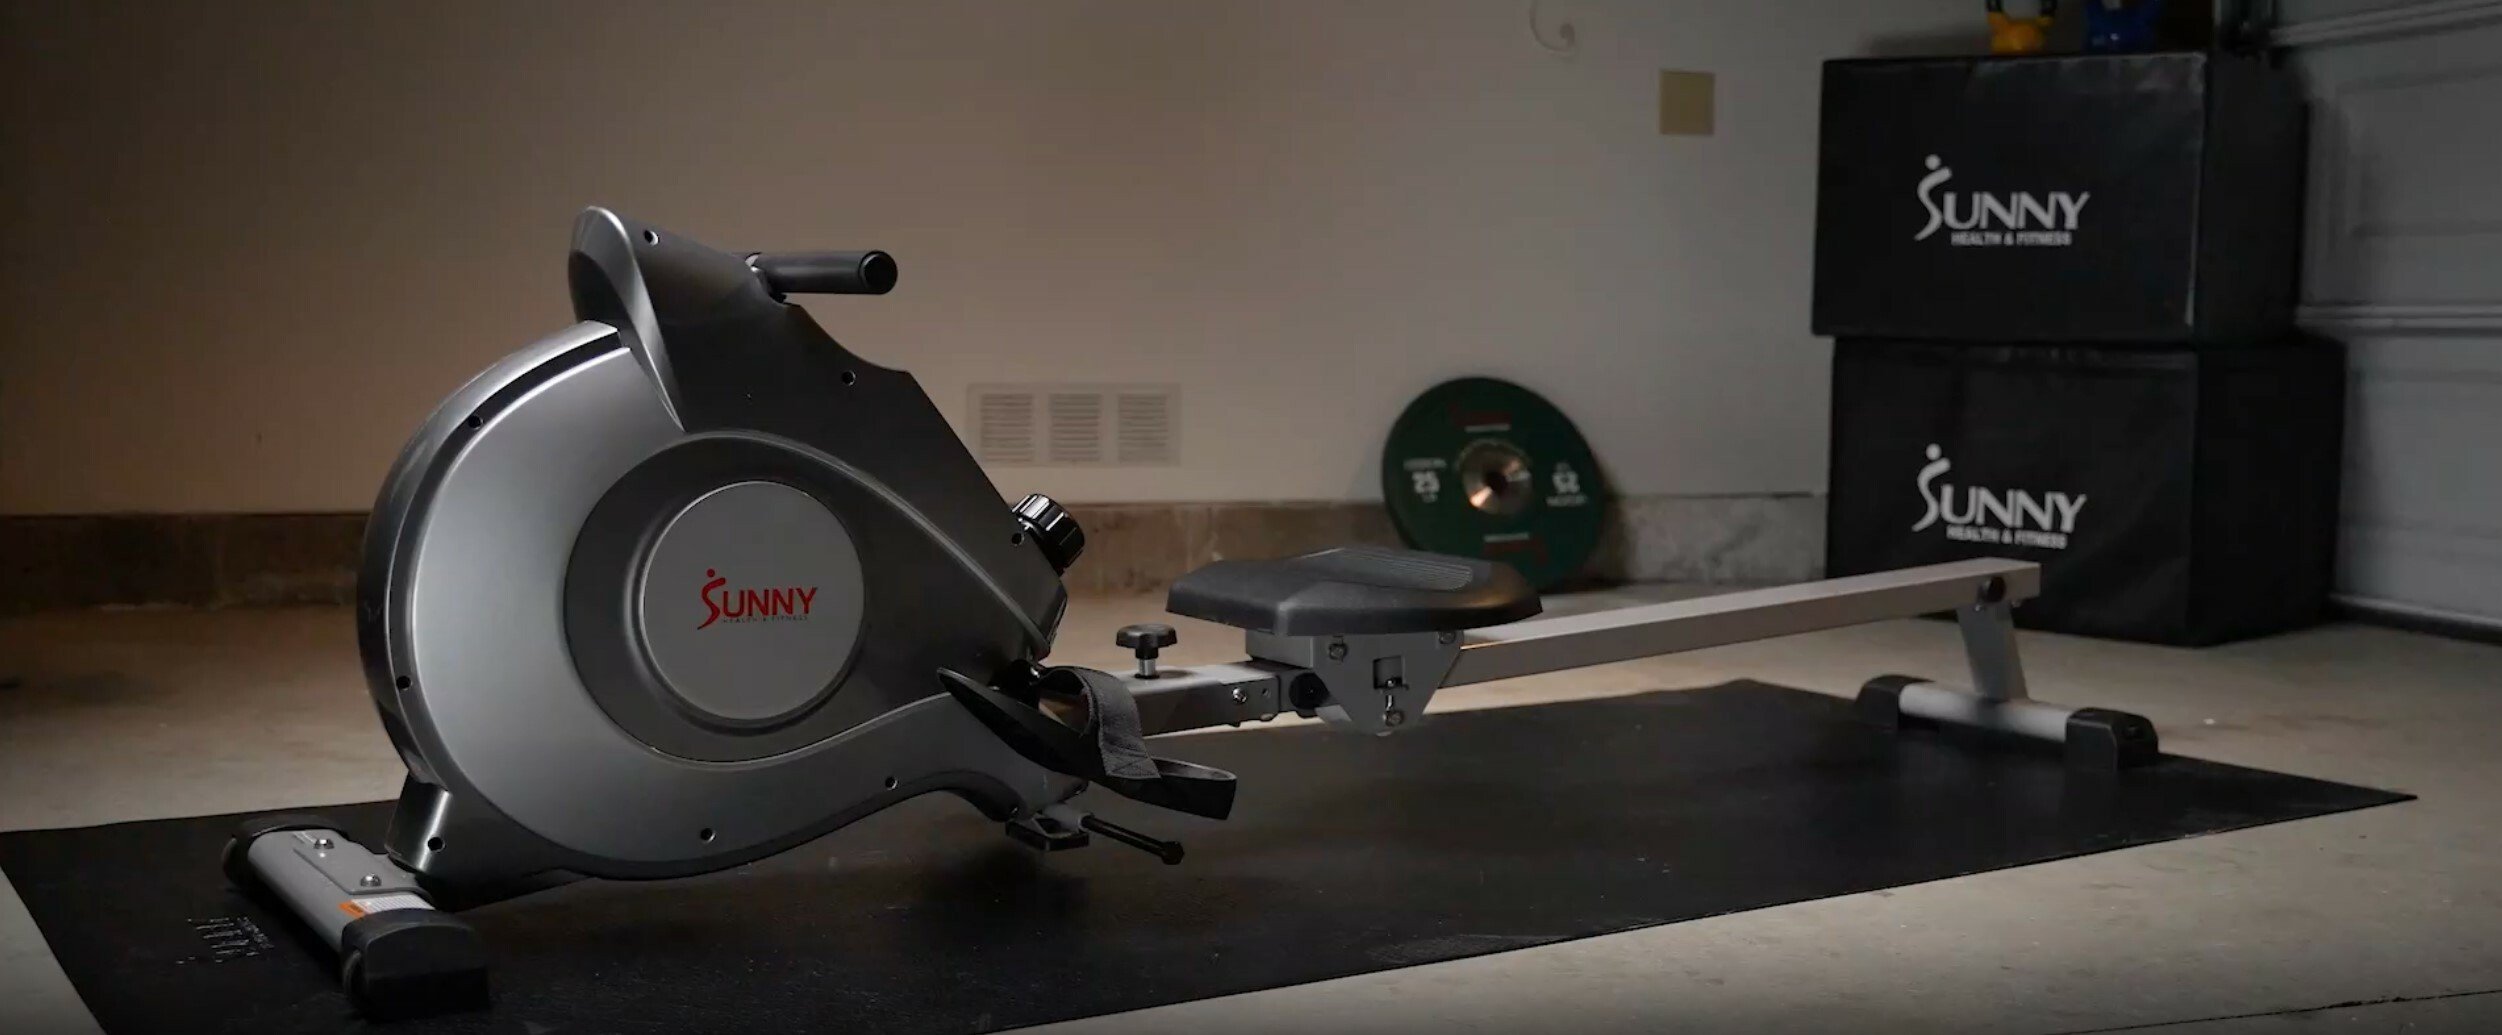 a sunny health rowing machine sits on a black mat on the floor with two large black boxes in the background that say sunny health